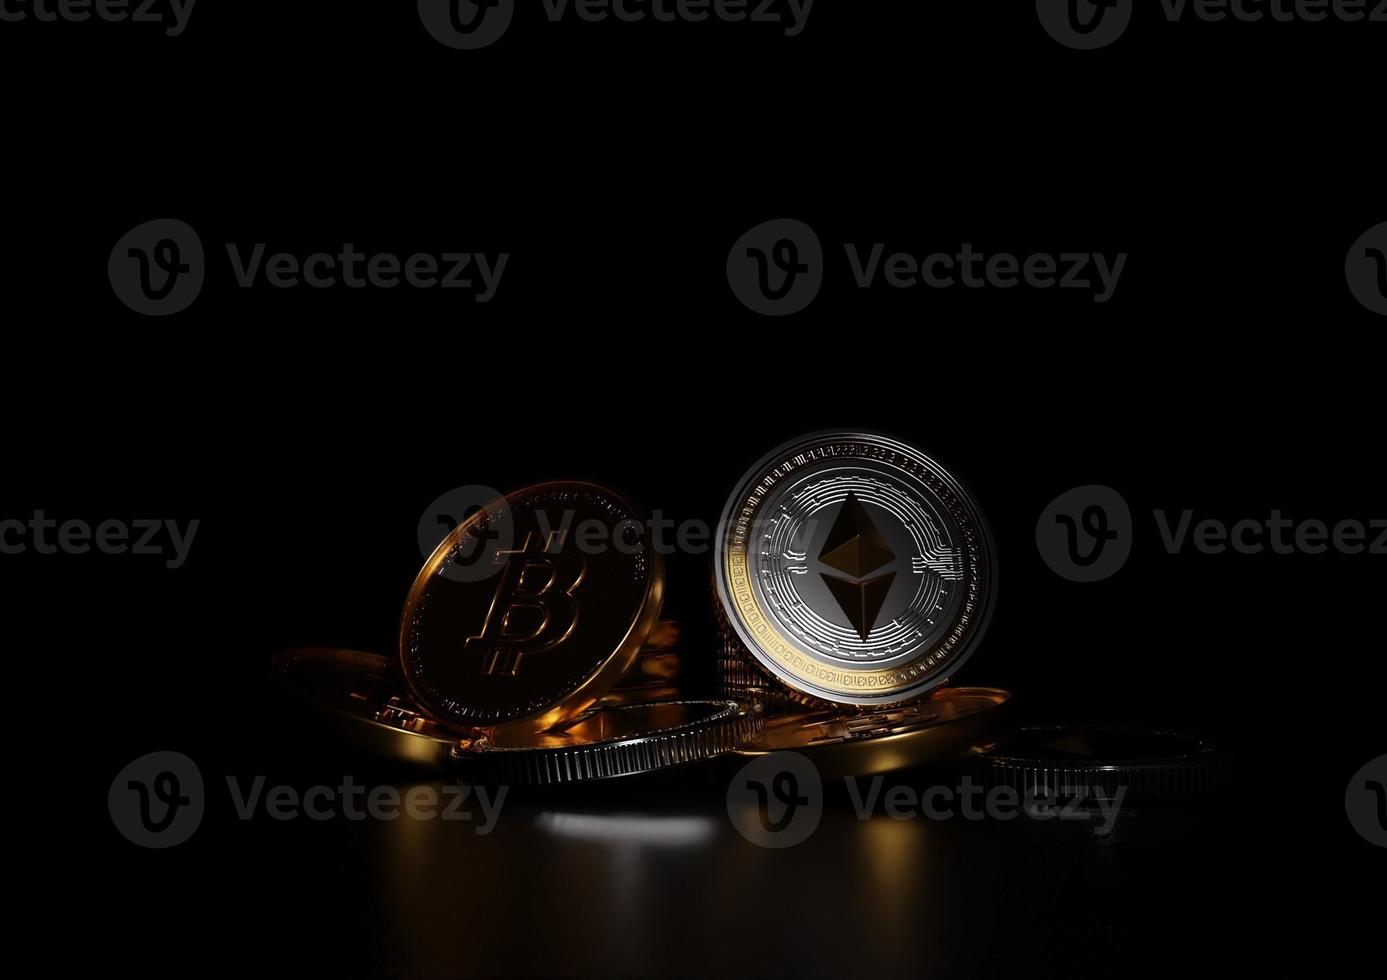 bitcoin and ethereum on black background, 3d bitcoin coins photo